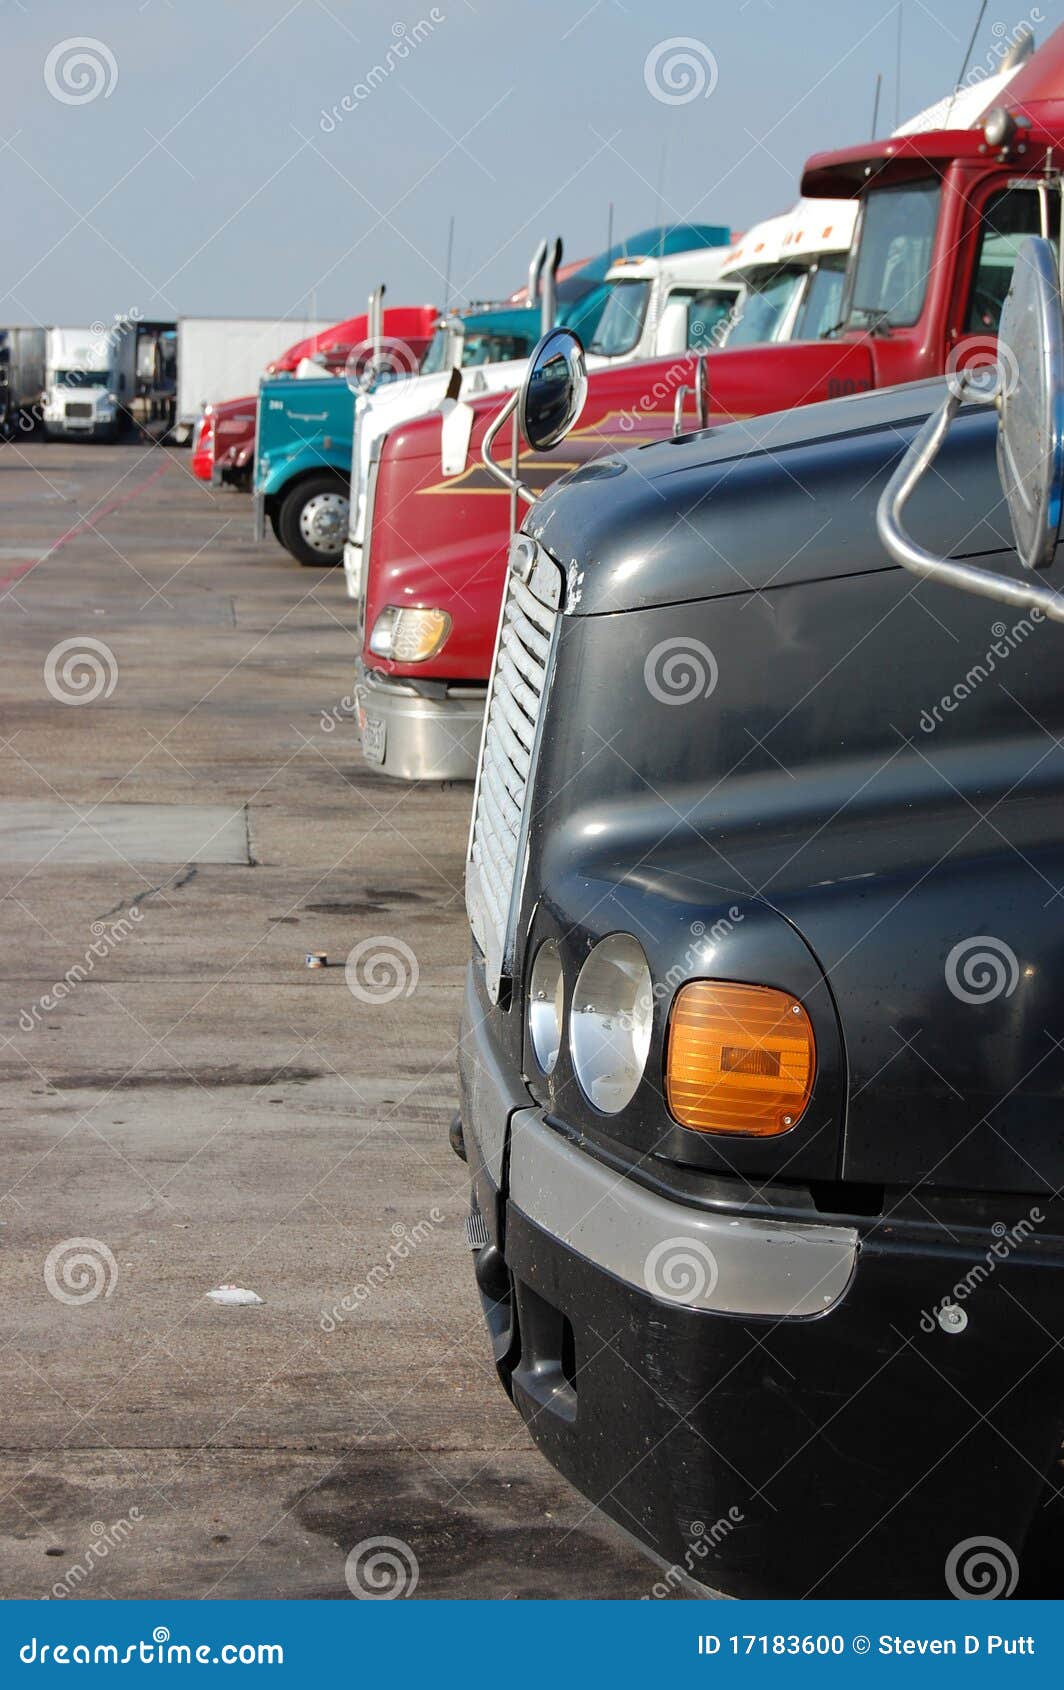 Truck Stop Parking stock photo. Image of truck, food - 17183600